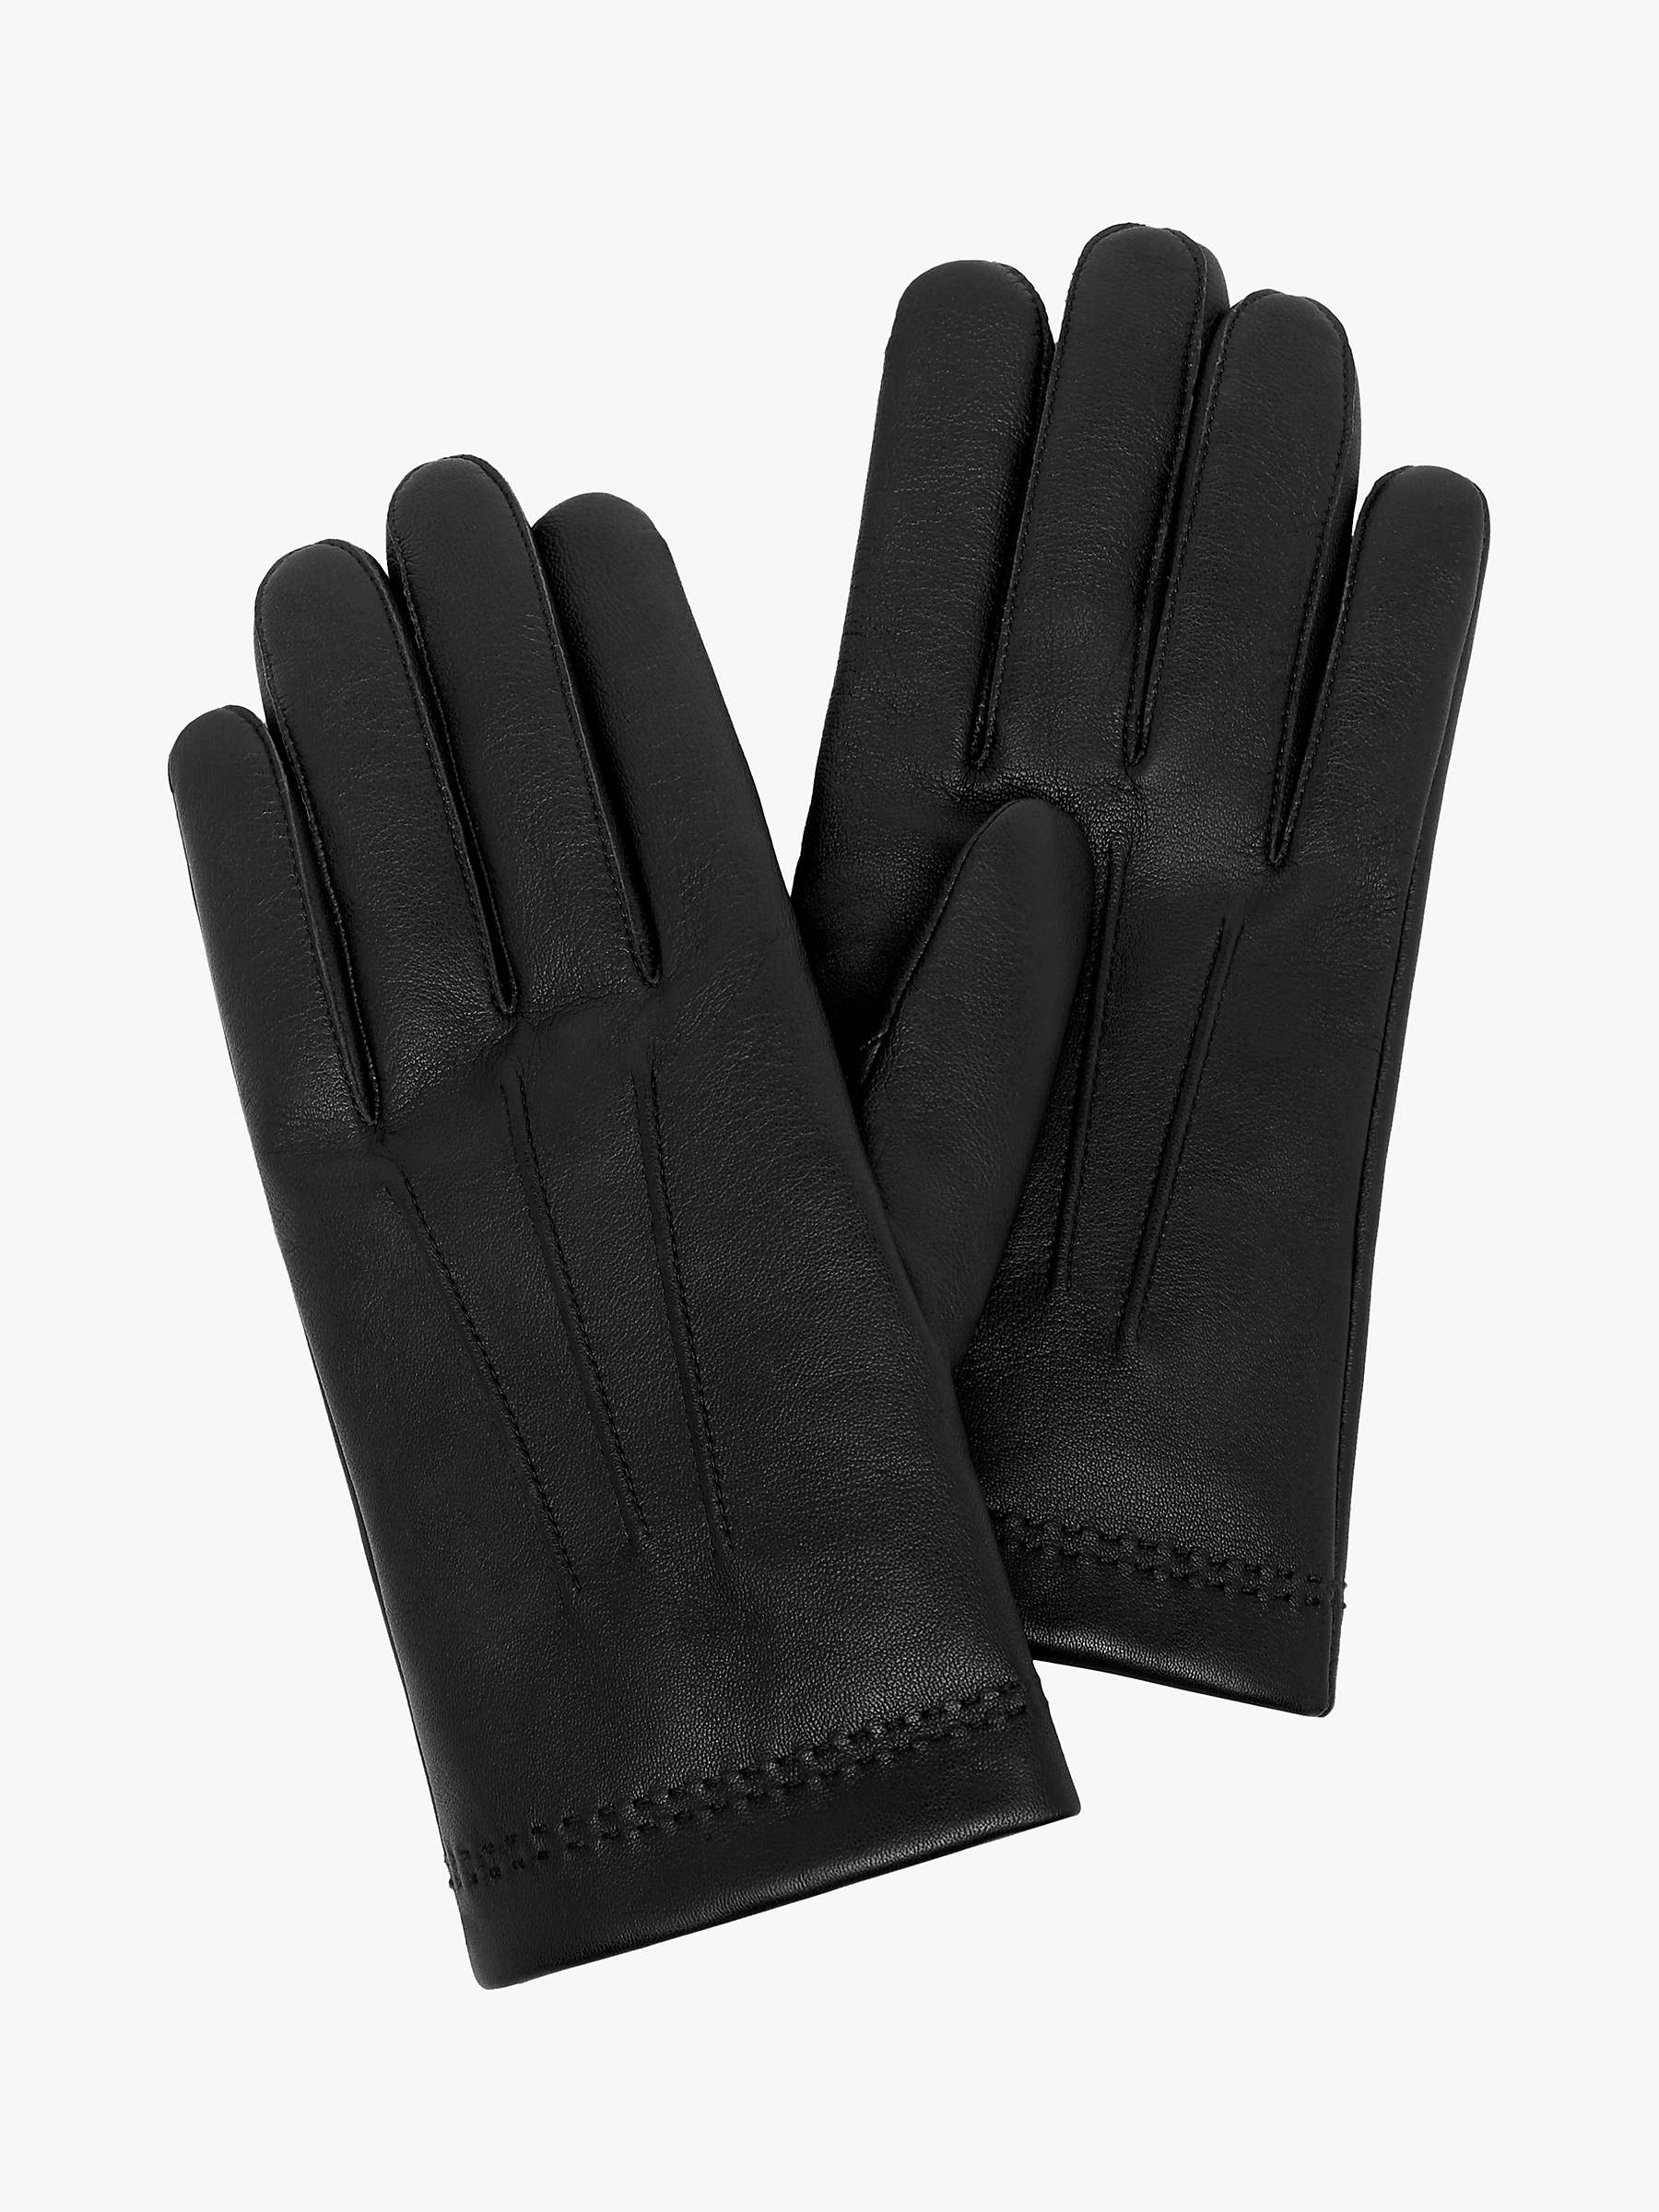 Buy Mulberry Nappa Gloves Online at johnlewis.com